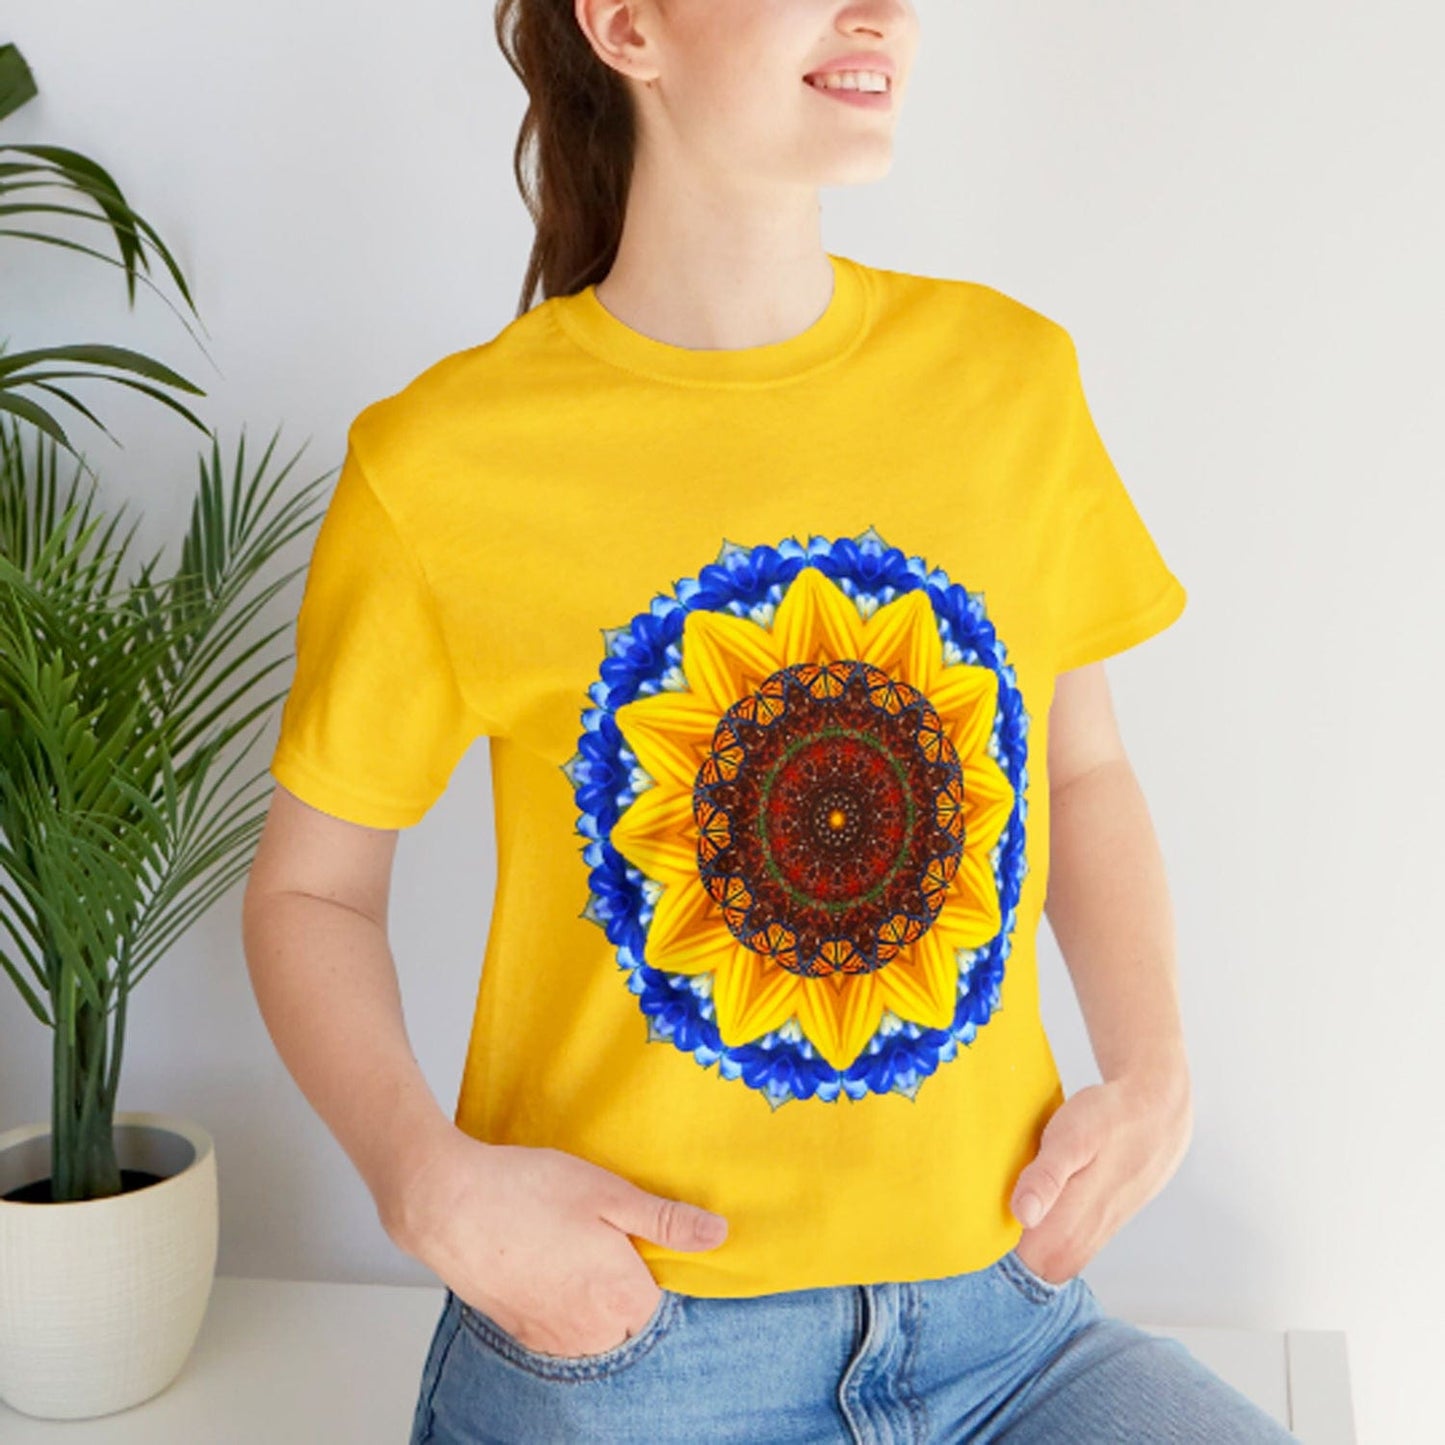 Monarch Butterfly Top, Sunflower TShirt, Best Selling Shirts For Butterfly And Sunflower Lovers, Mandala Fairycore Cottage Core Clothing,